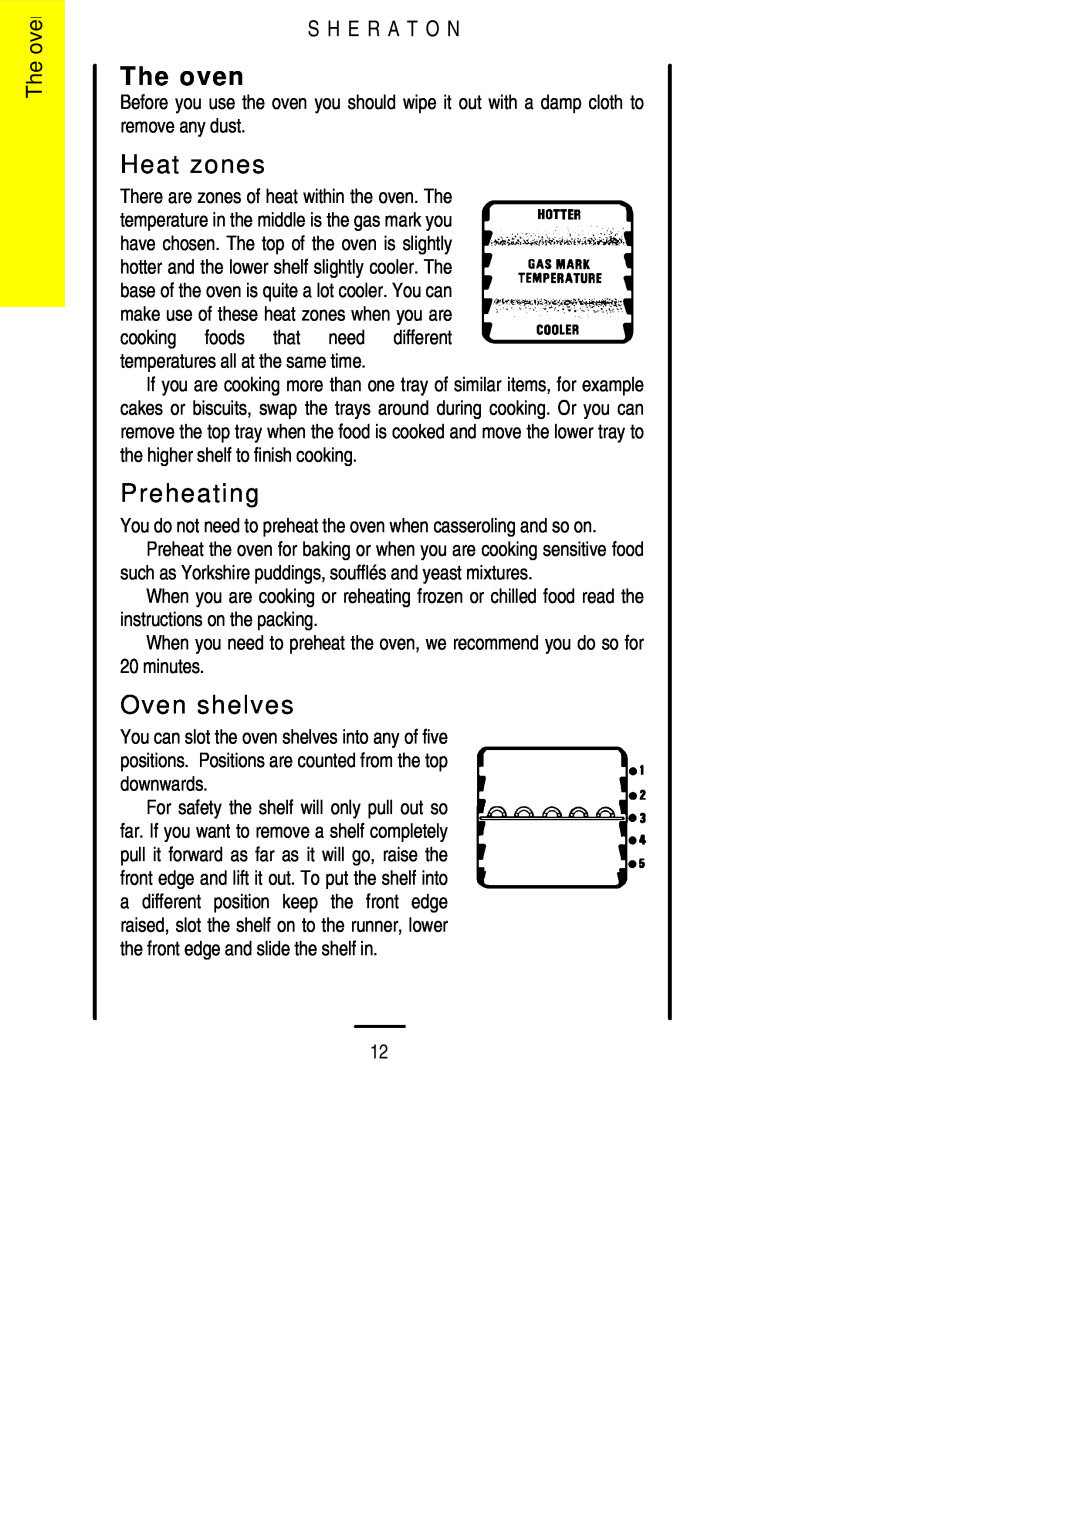 Parkinson Cowan U02059 installation instructions The oven, Heat zones, Oven shelves, Preheating, S H E R A T O N 